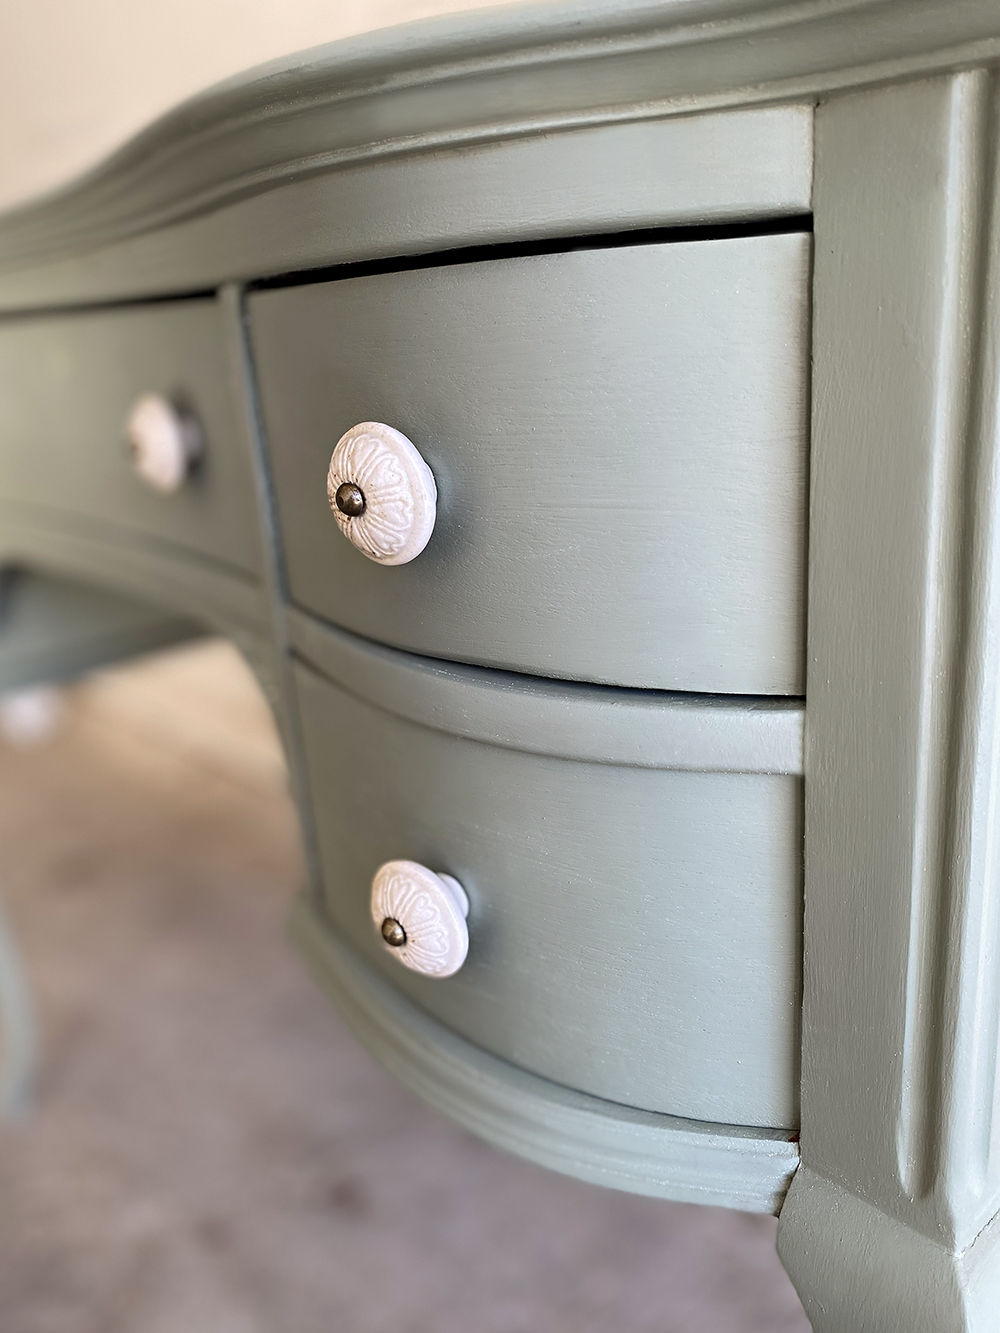 Sharing a peek into an upcycled antique DIY desk using milk paint that will be going in the girls' bedroom. Get a look at this ongoing project over at KaraLayne.com!